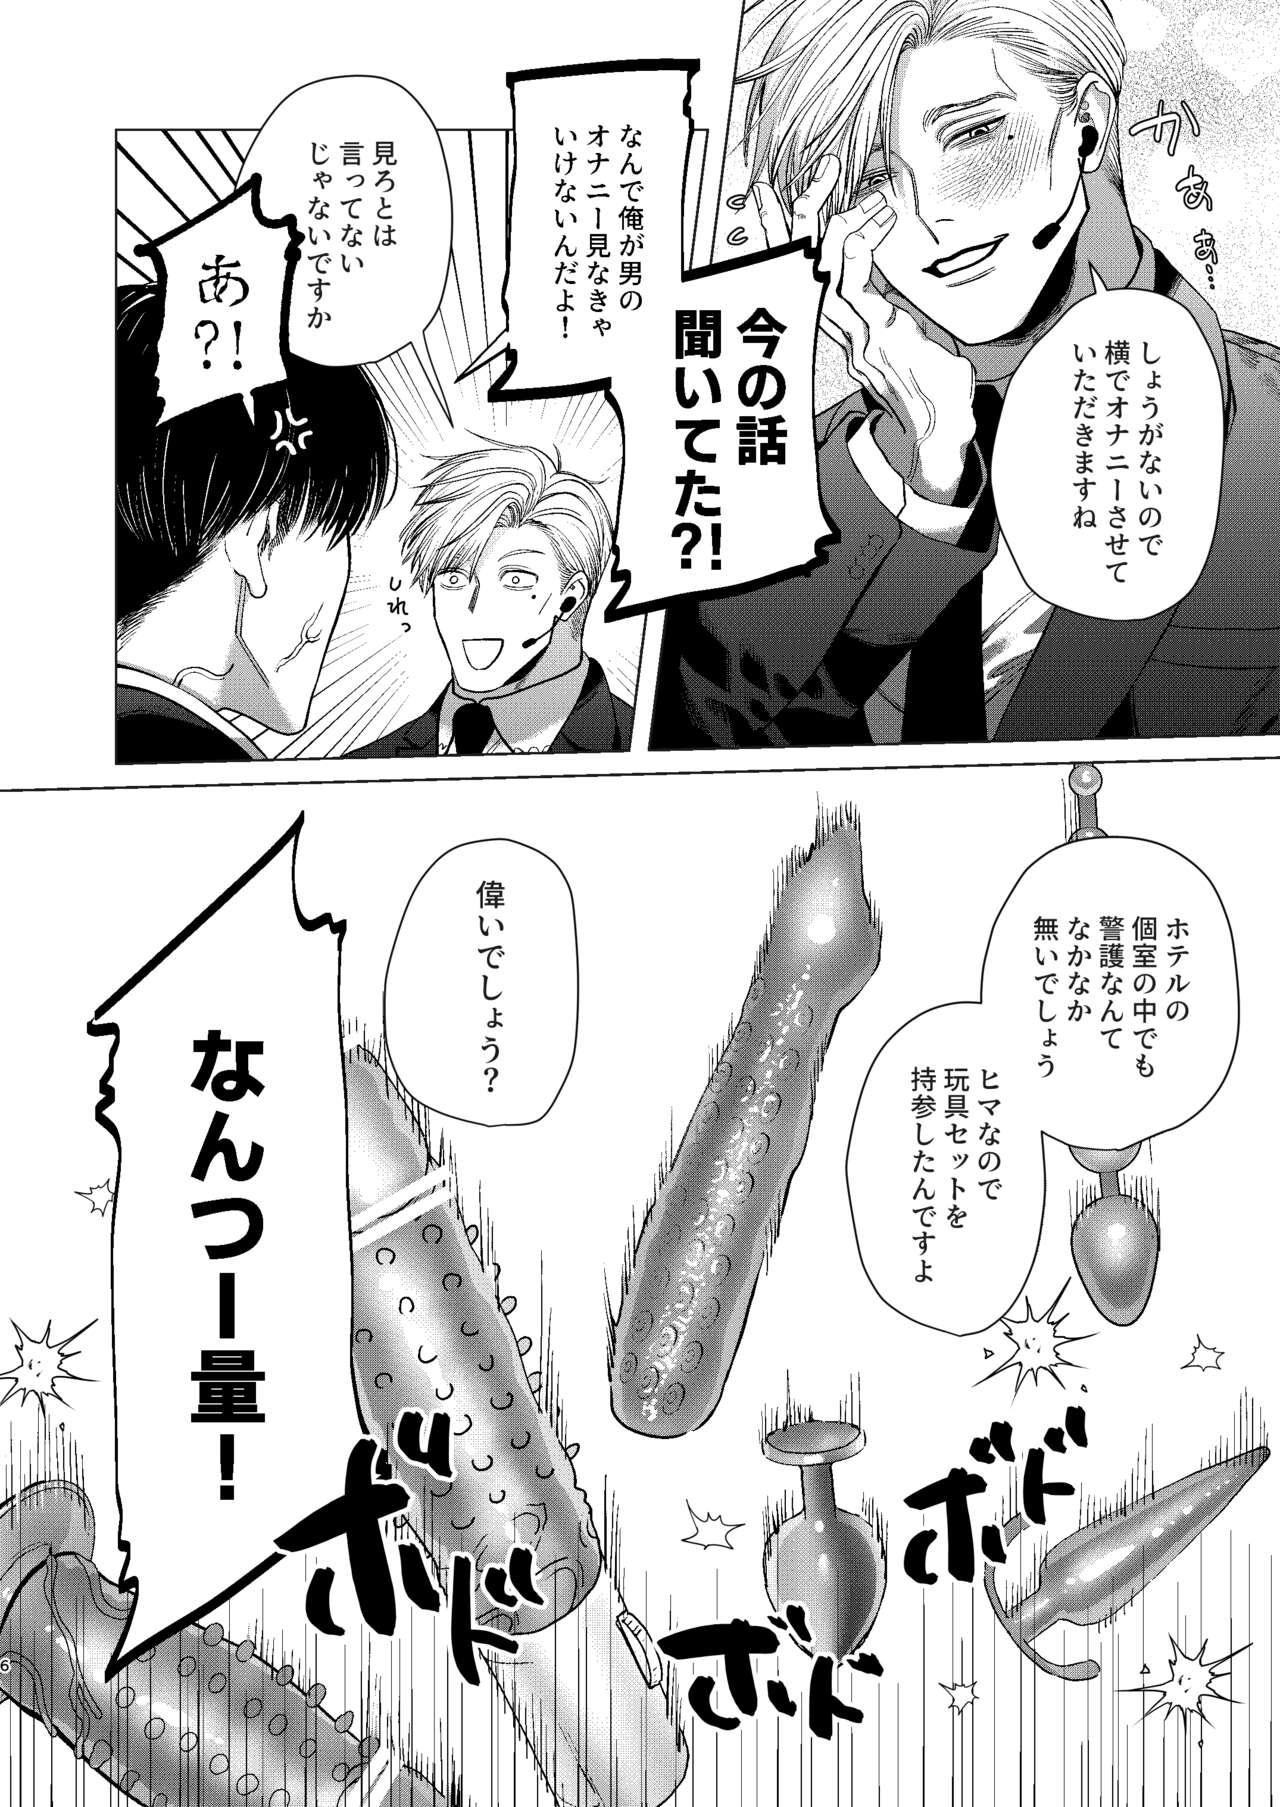 Pigtails Ore o Mamoru no wa Kinpatsu Gachimuchi Inran SP?! | The One Who Protects Me is the Blond Hairy Horny SP?! - Original Cousin - Page 5